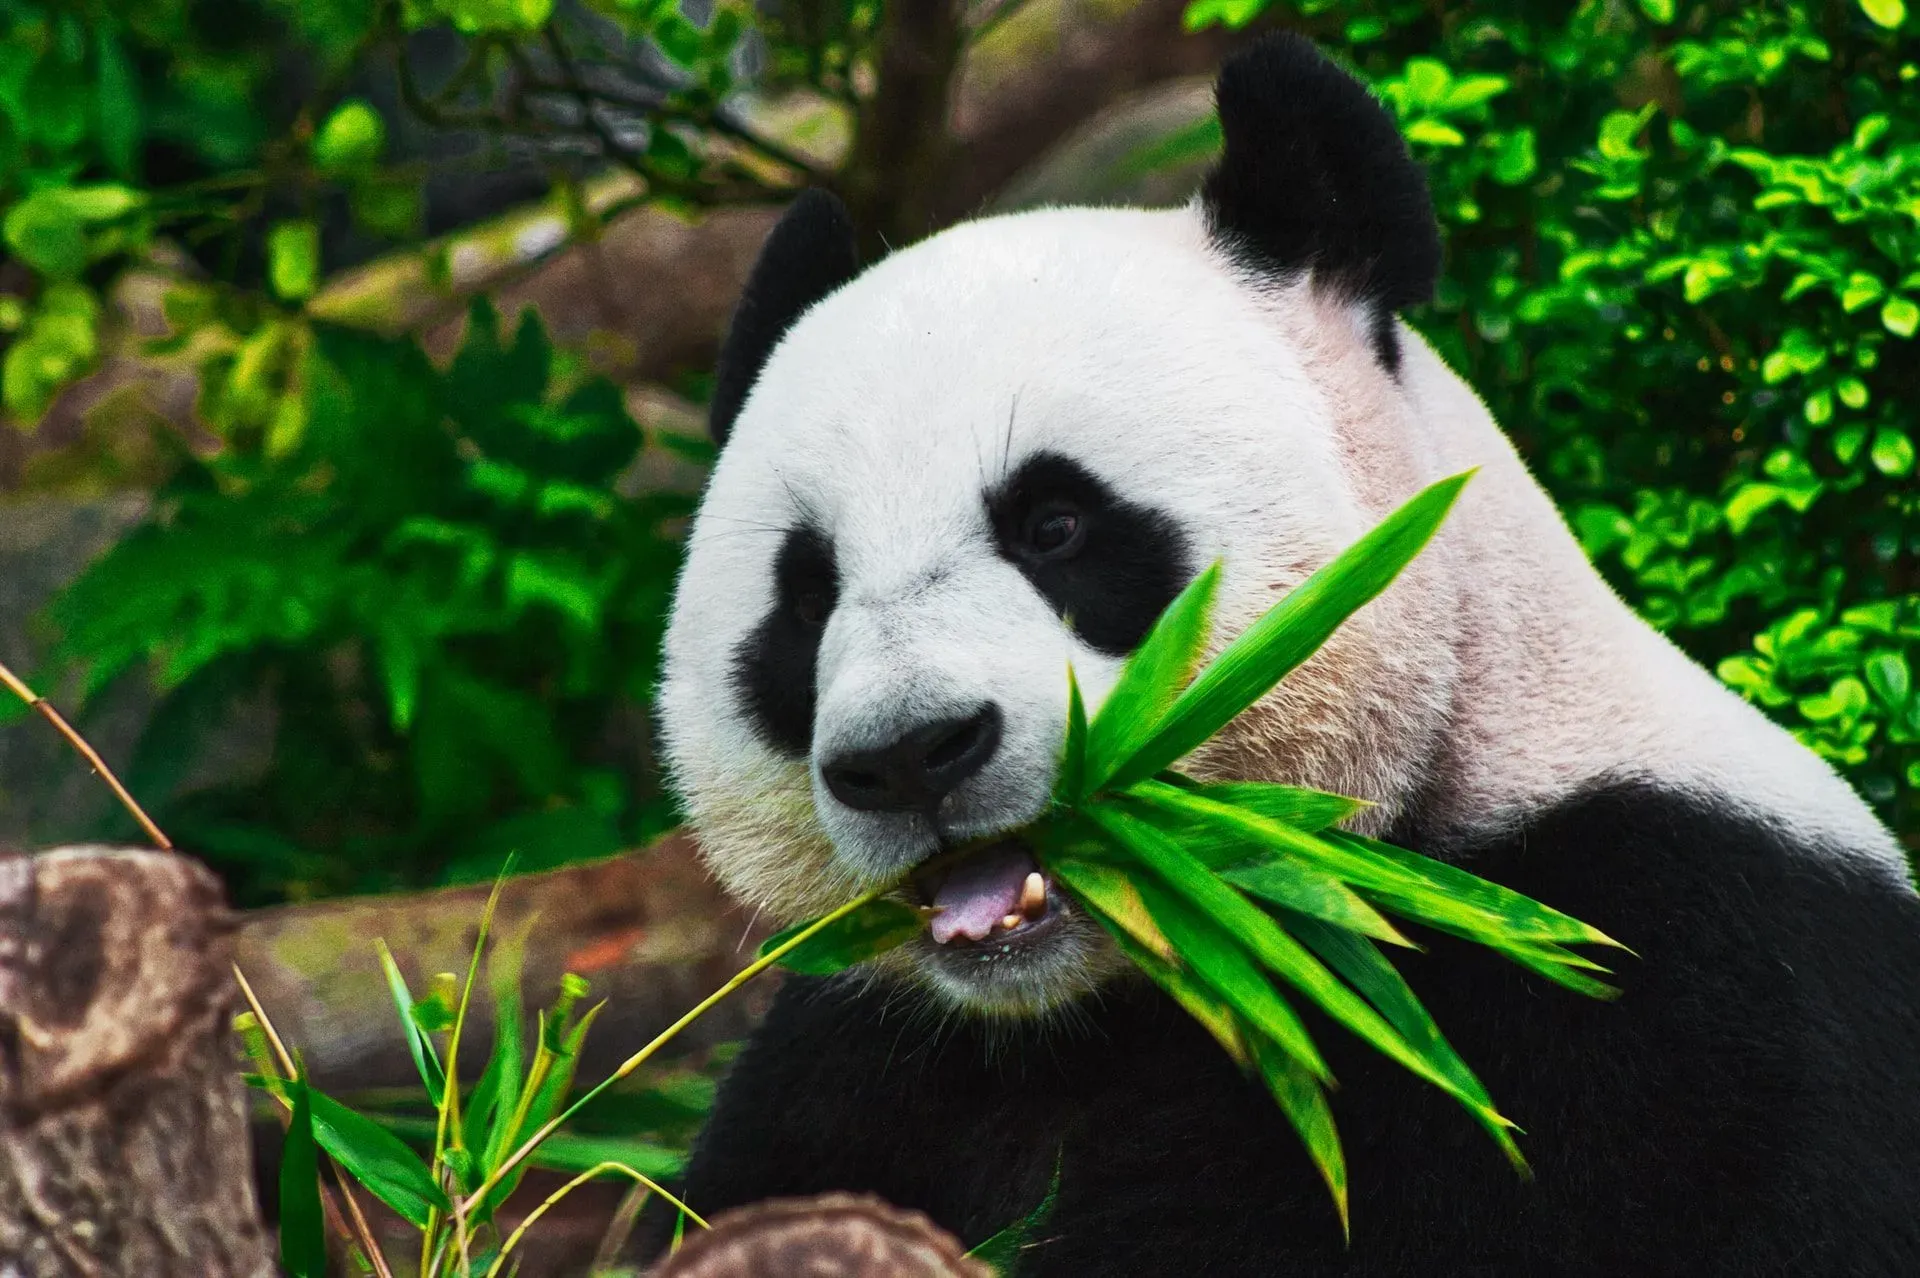 Pandas are one of the cutest warm-blooded animals! But, unfortunately, they have been threatened for a number of reasons and have become Endangered.